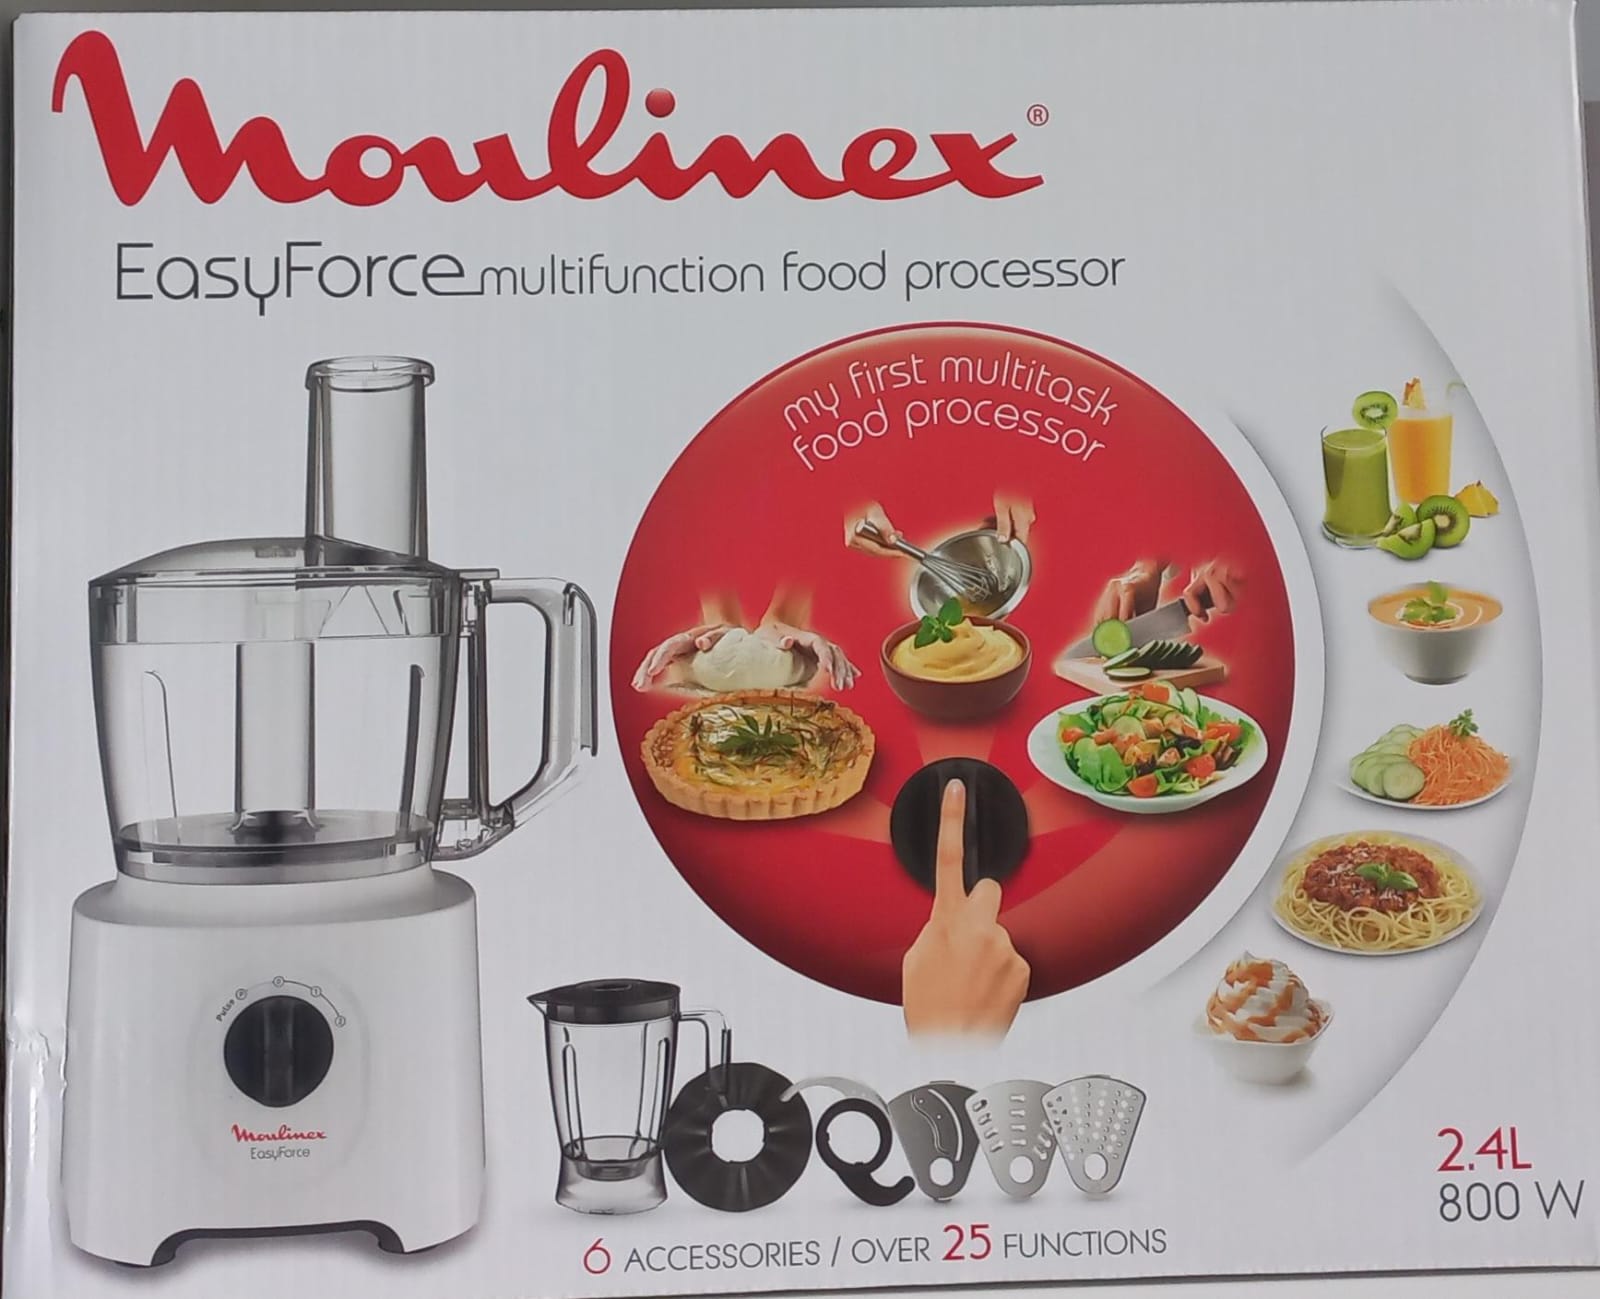 Food Processor MOULINEX - Tjara - Online Shoppping & Selling in Lebanon -  Buy, Sell, Auction Products, Cars - Lebanon